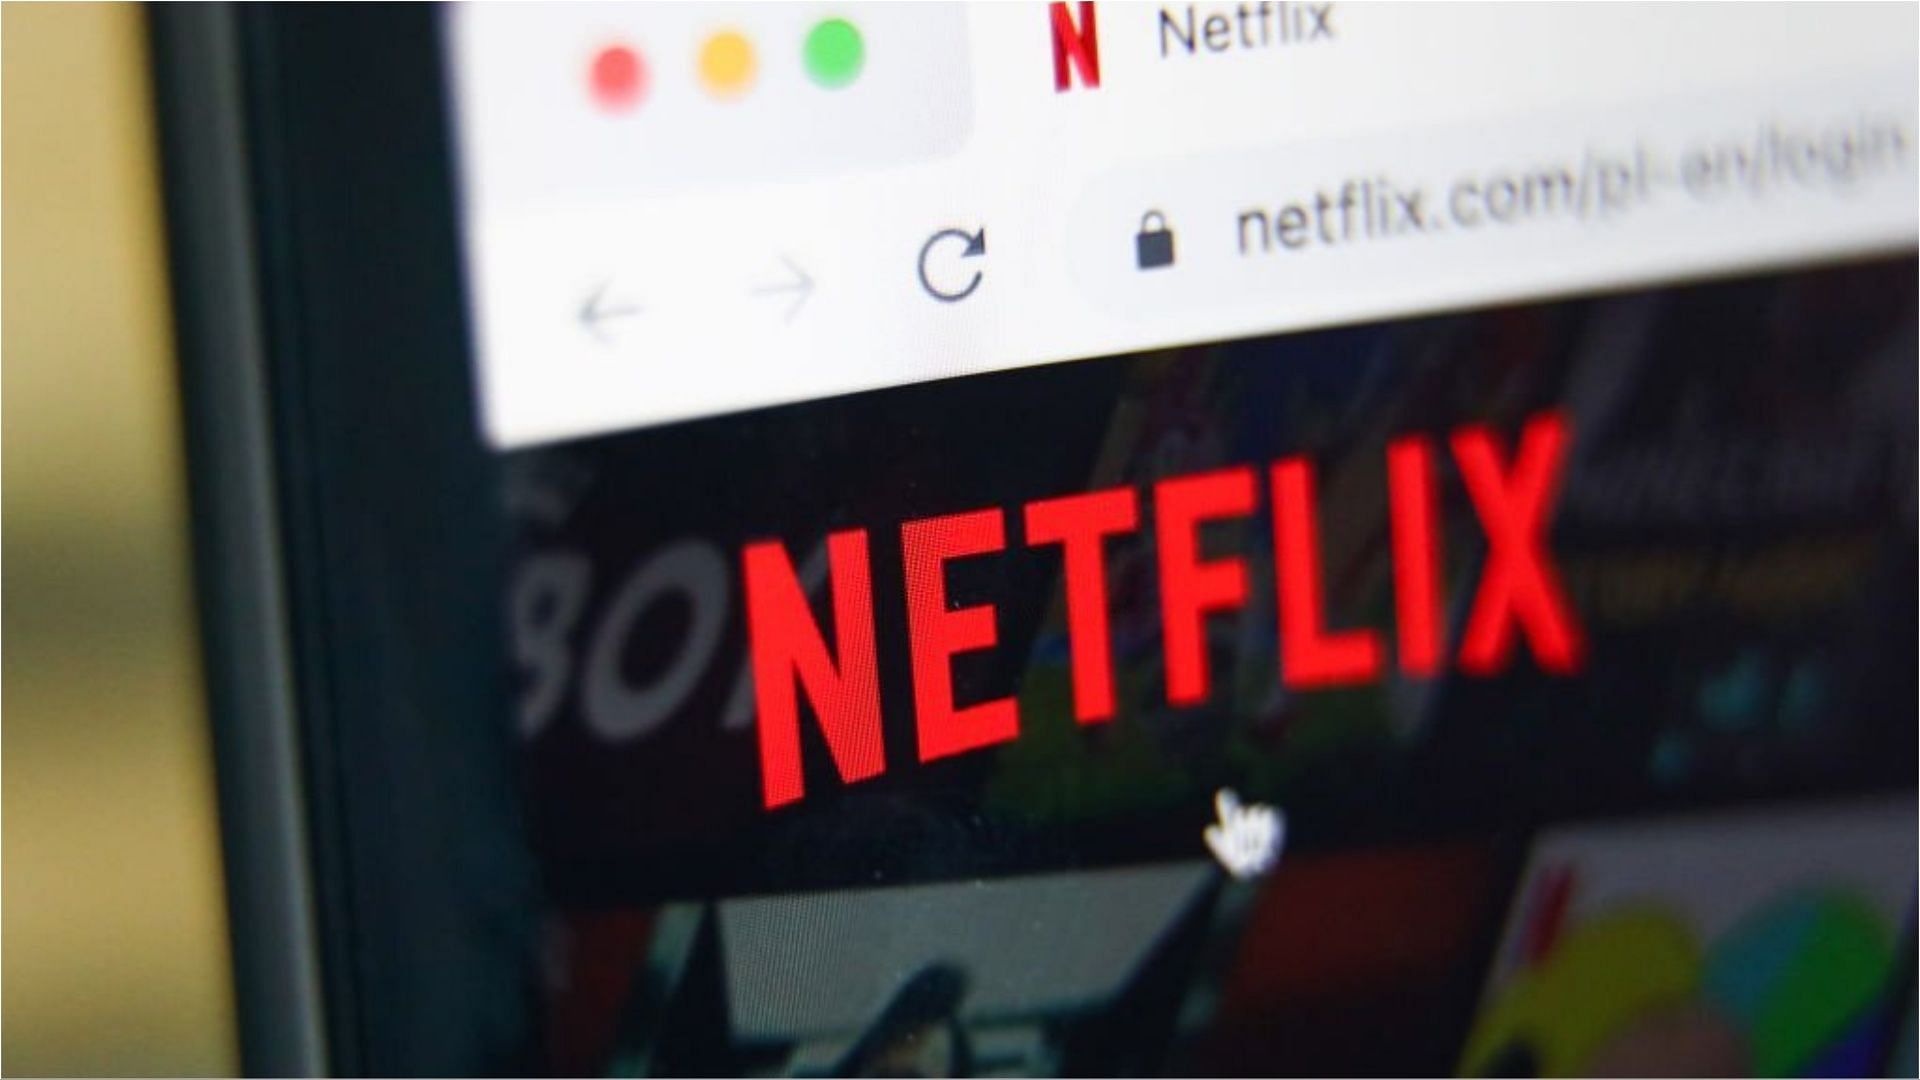 Netflix has launched the password sharing service for the users in the US (Image via Jakub Porzycki/Getty Images)